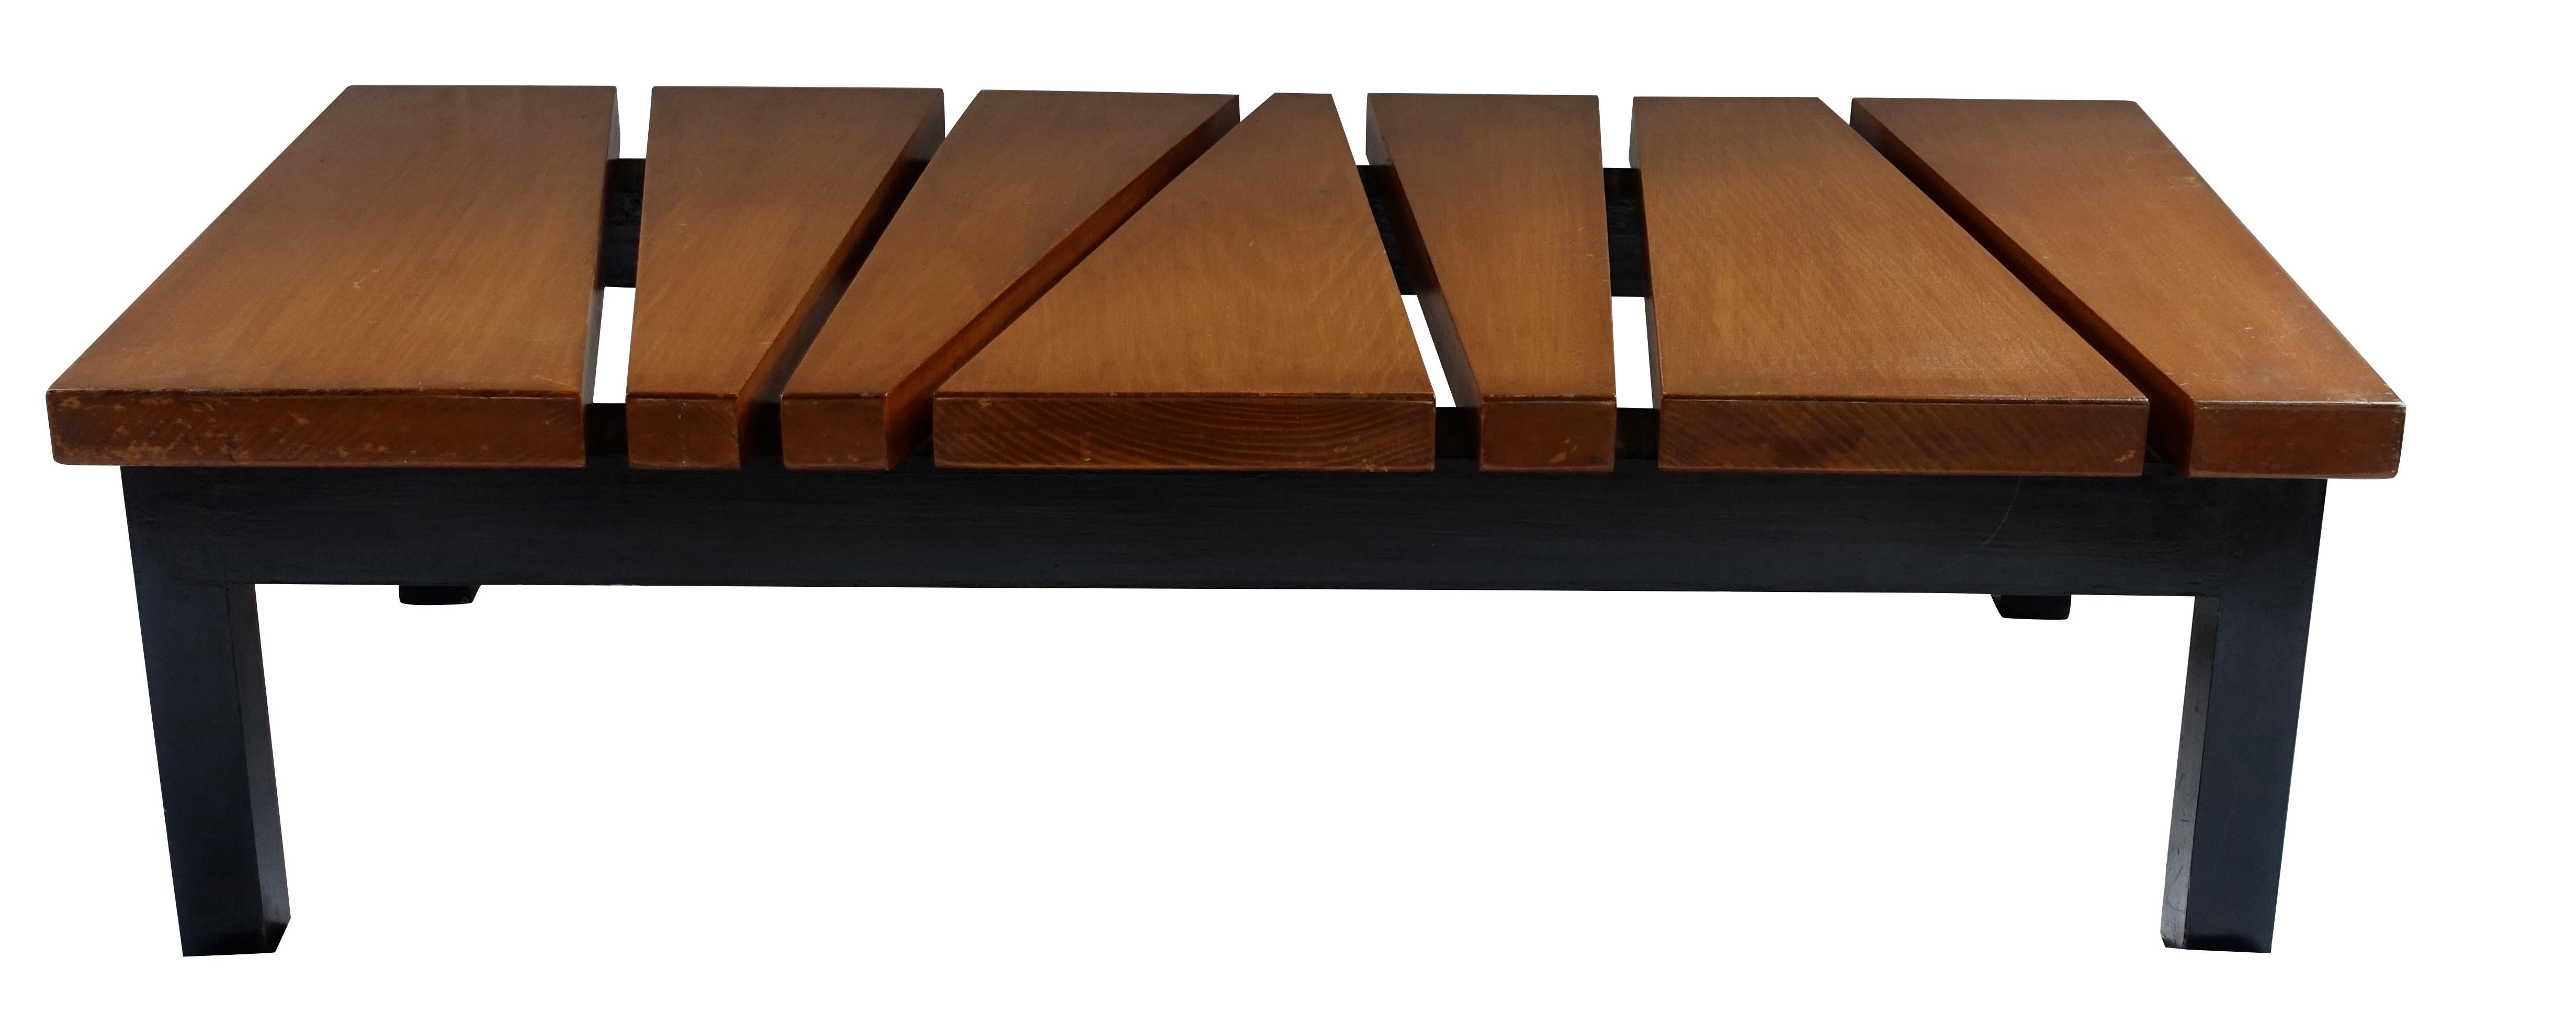 Mid-Century French coffee table with a black base and brown top.
Zig Zag top design.